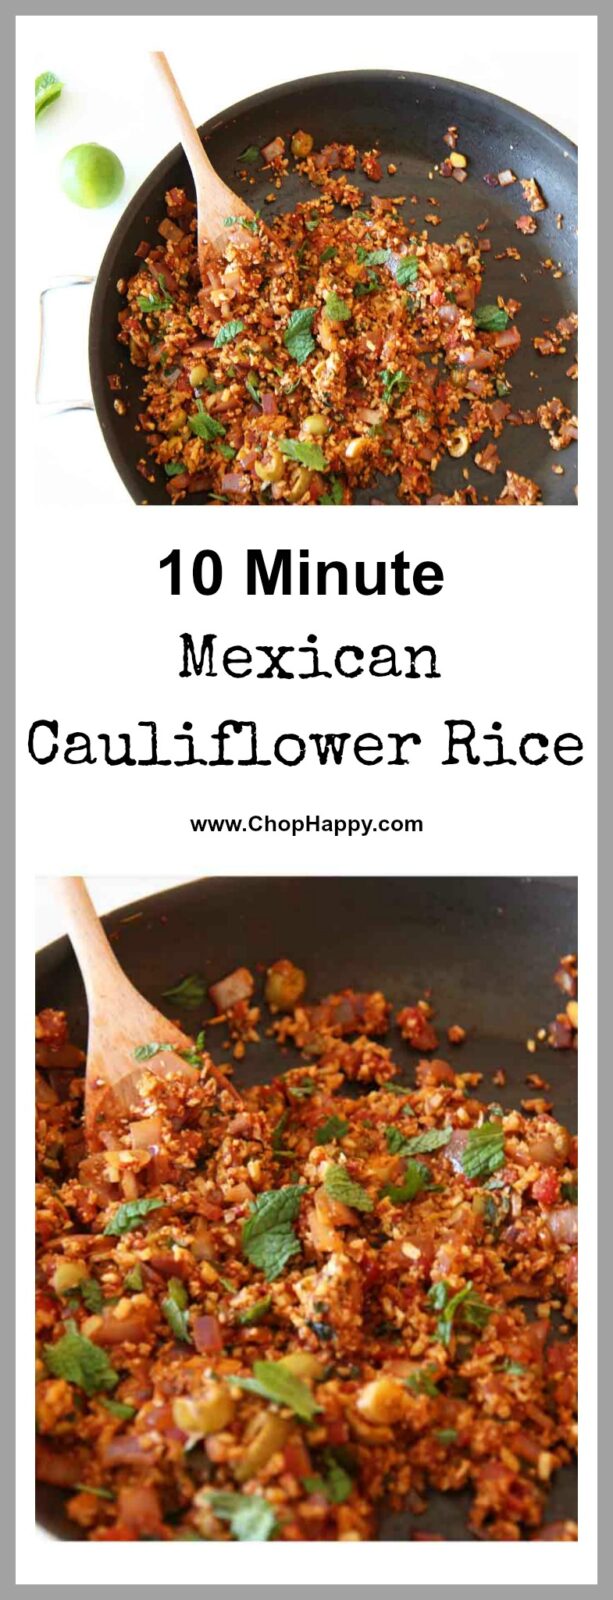 Mexican Cauliflower Recipe- in 10 minutes you have a sweet and spicy comfort food smile. Cauliflower rice cuts the cook time in 1/2 and is such a great weeknight meal on the go. Just a few ingredients like cauliflower rice, canned tomato, jalapeno and more yummy stuff. www.ChopHappy.com 